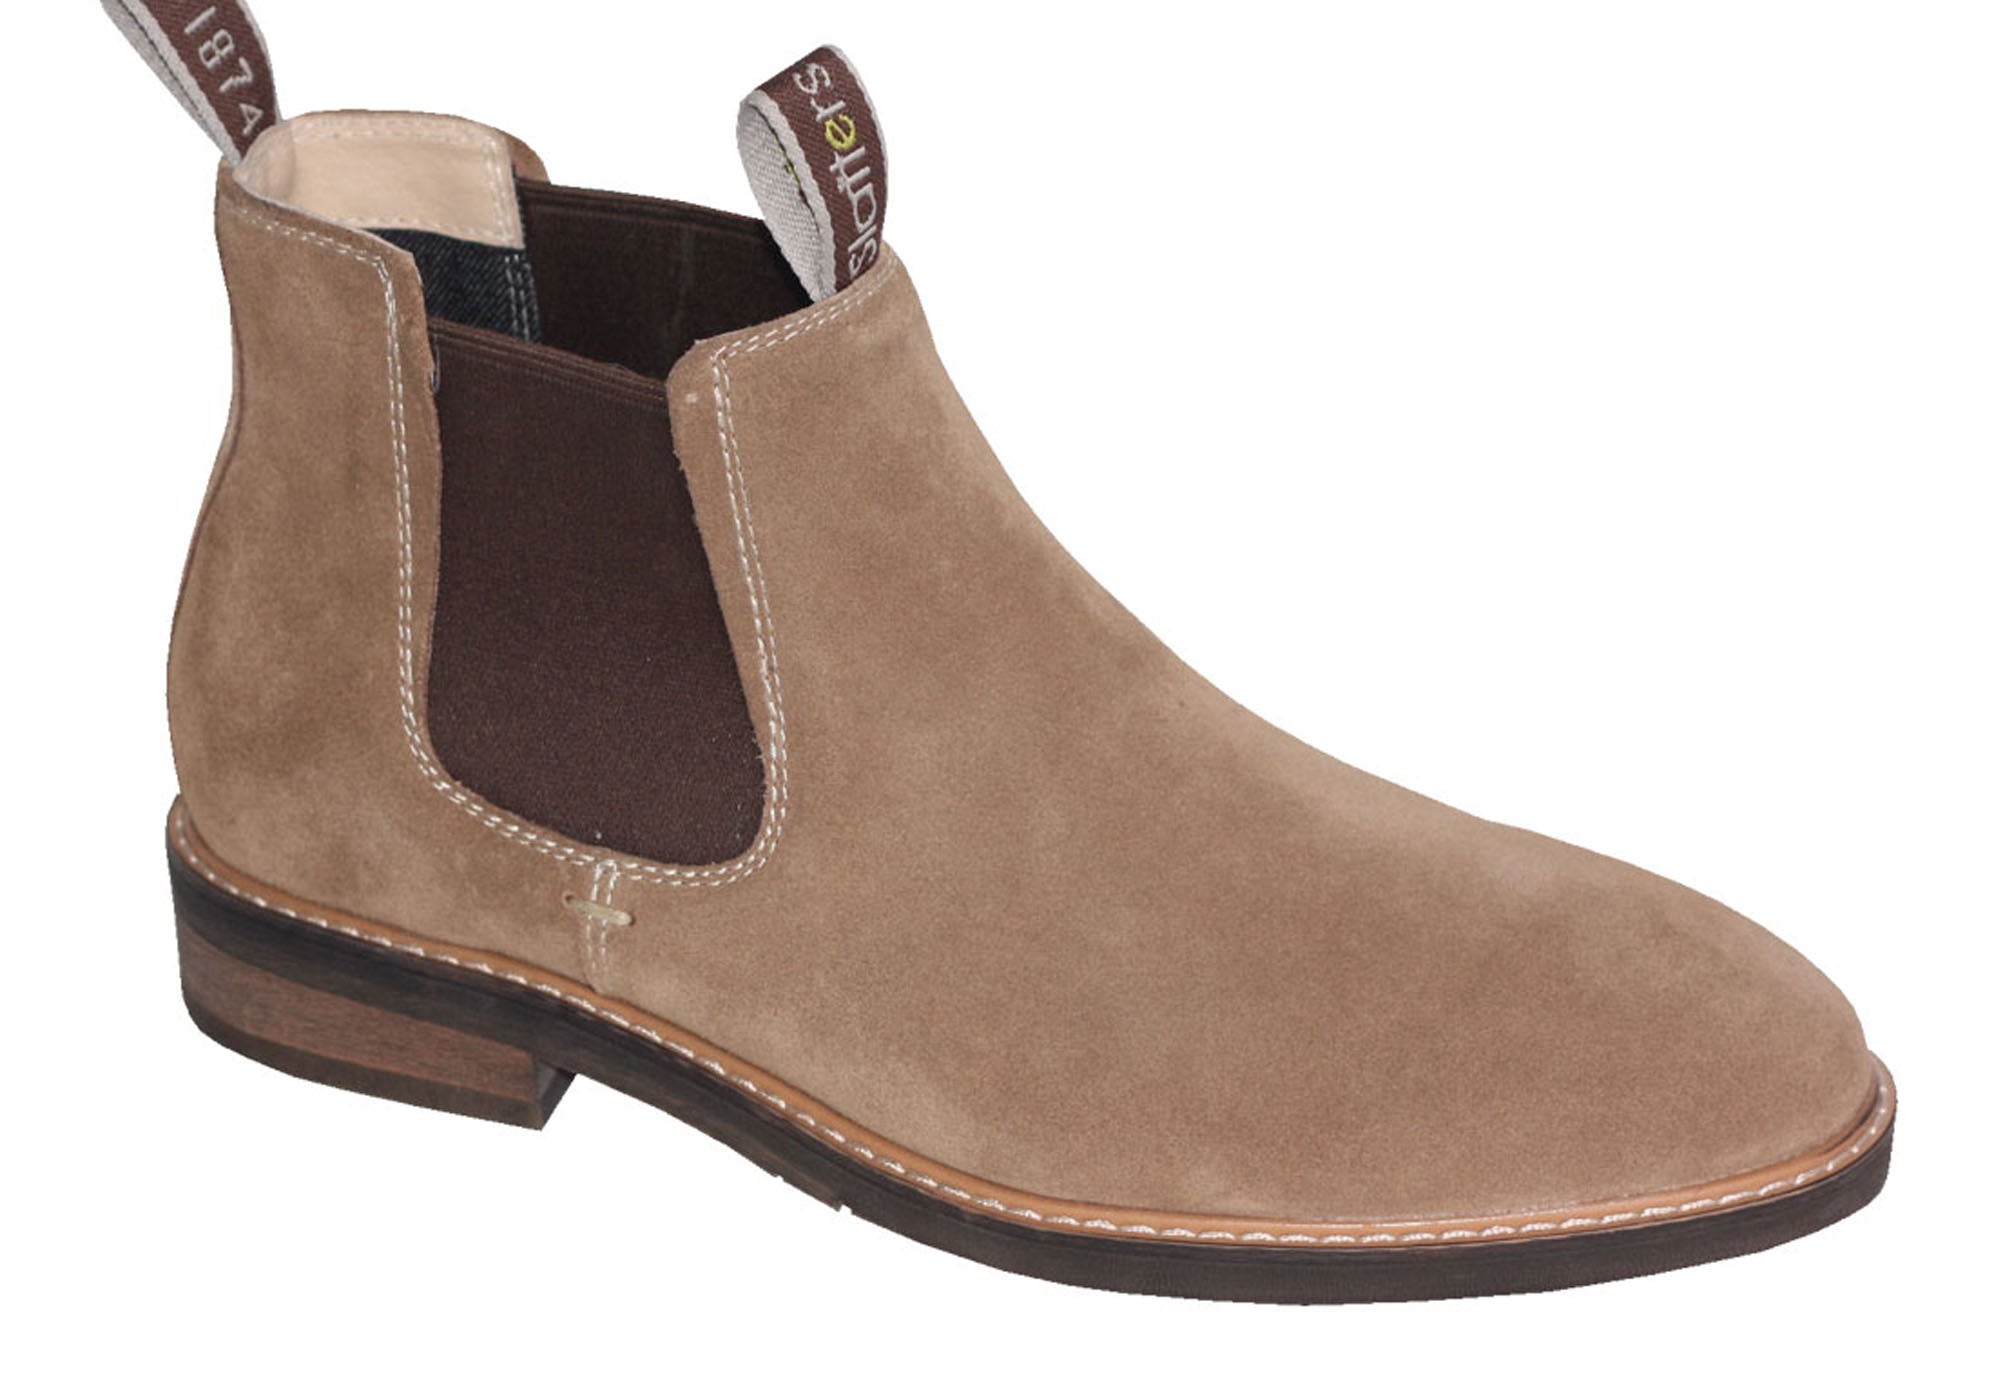 mens suede dress boots